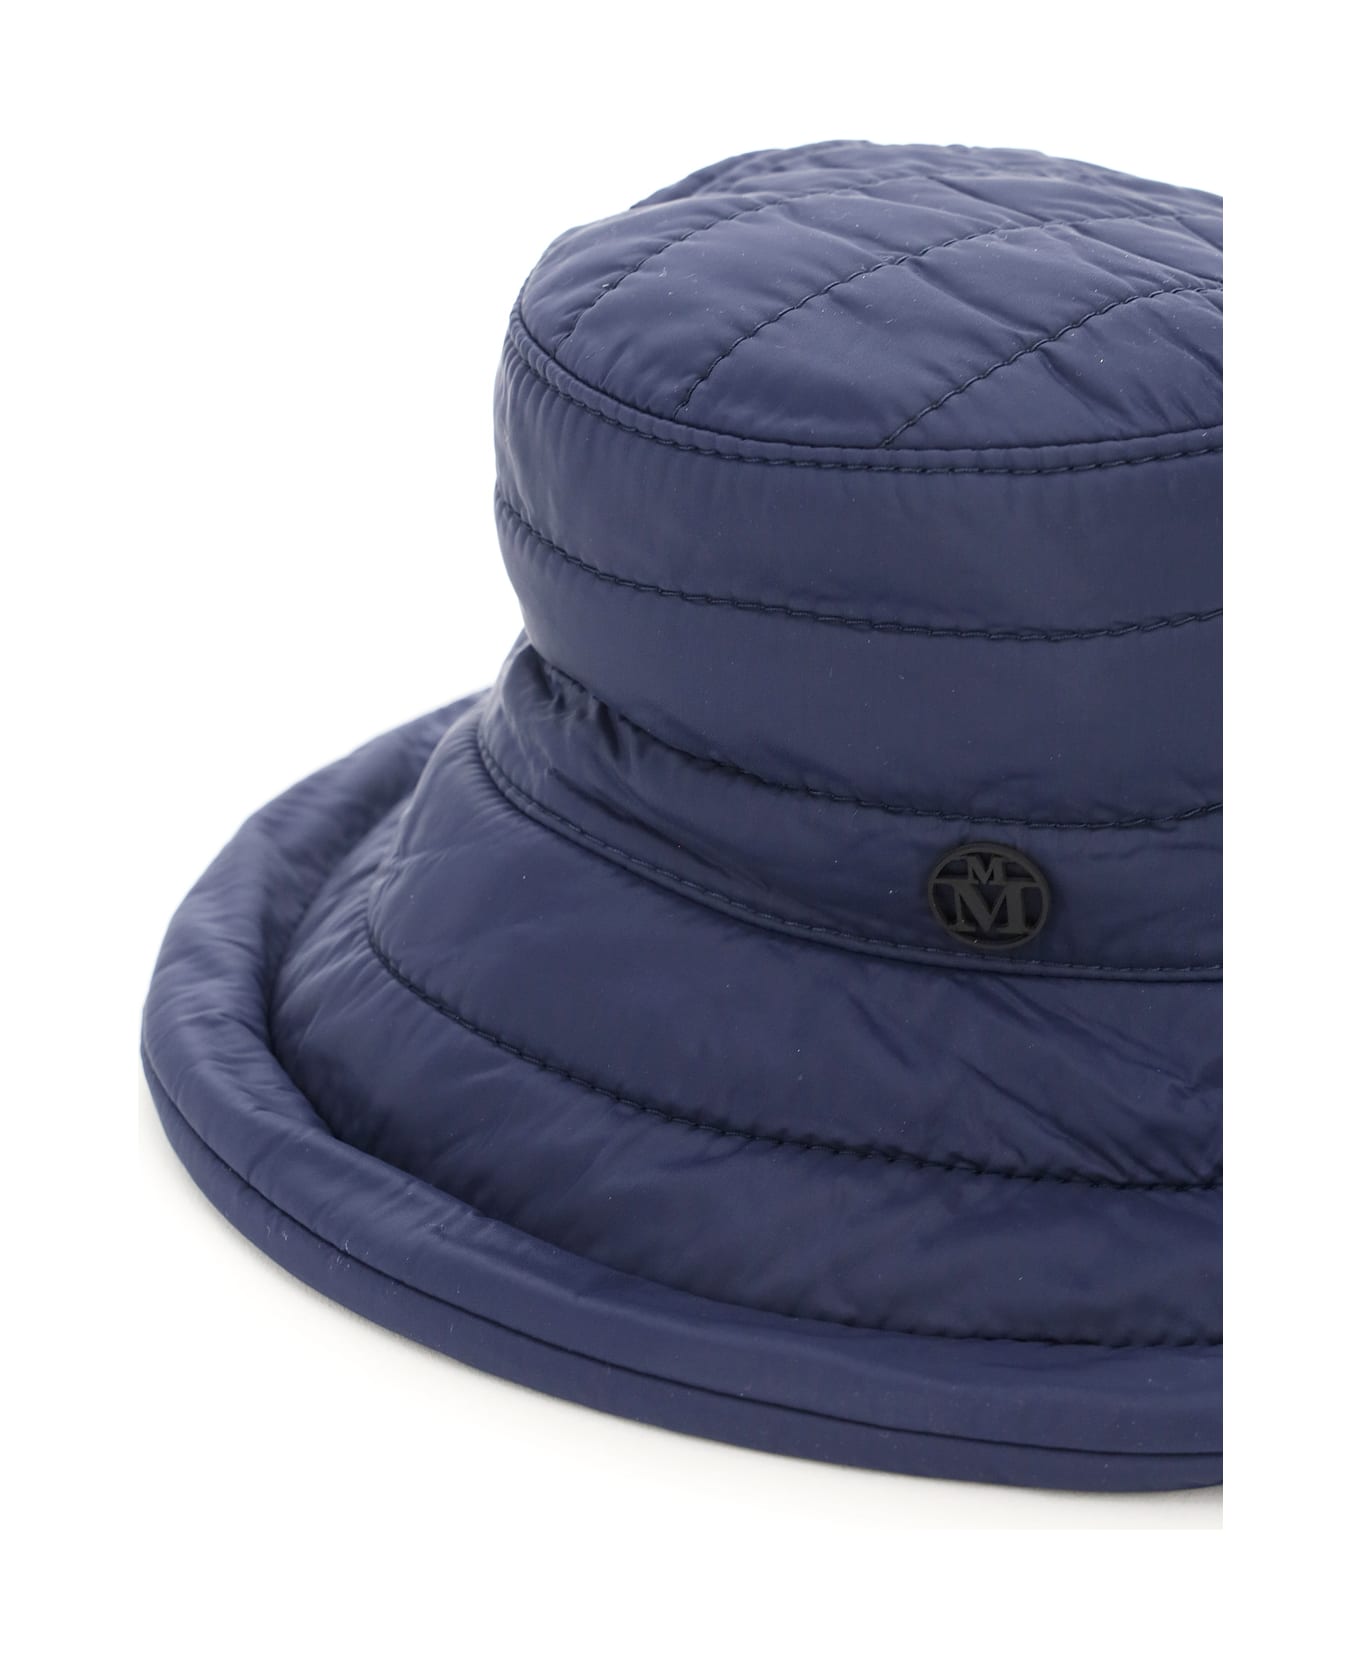 Maison Michel Quilted Charlotte Hat - NAVY (Blue)